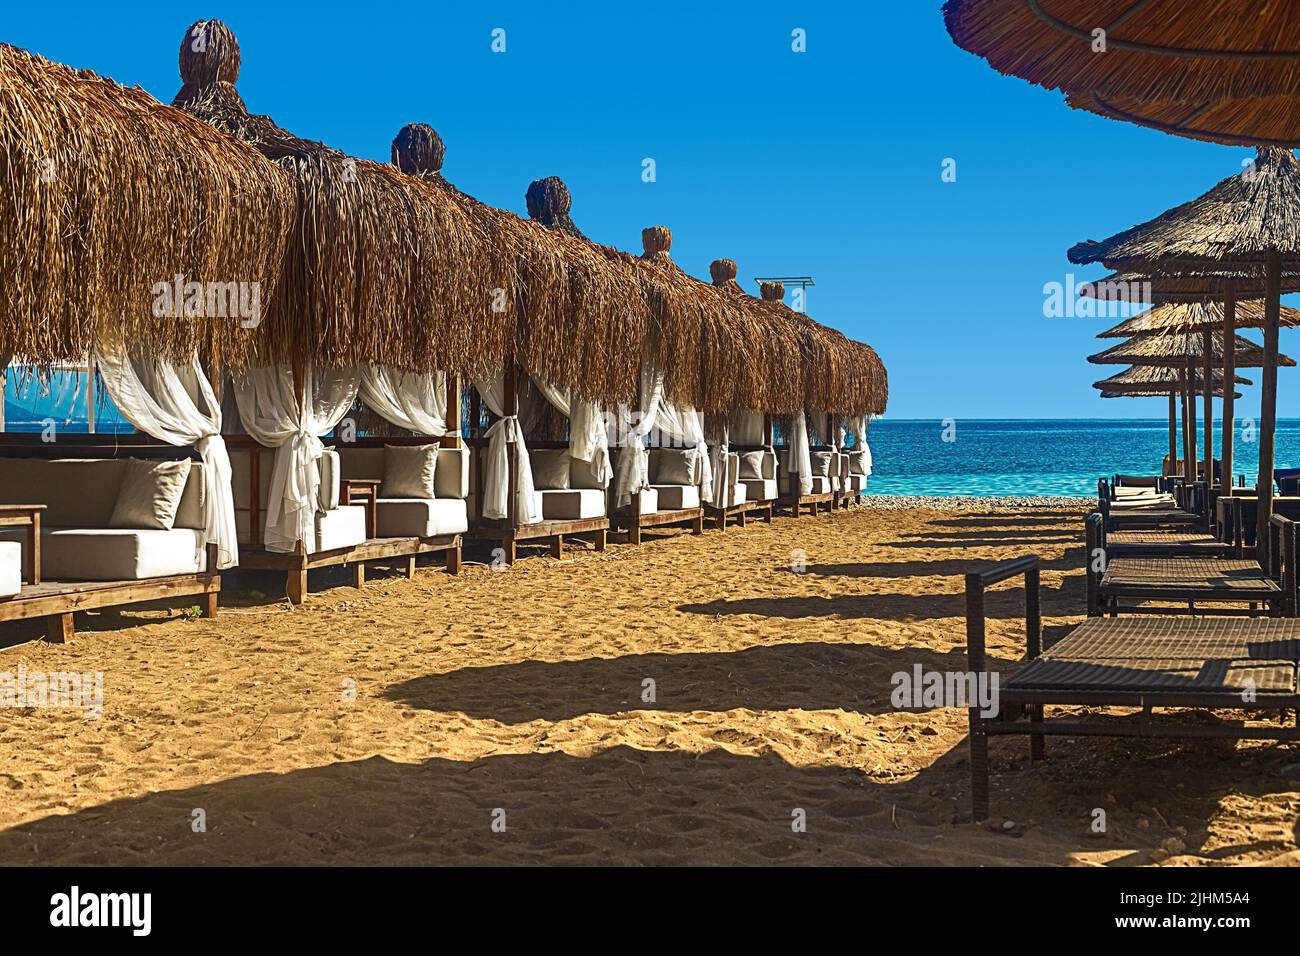 View of deck chairs and umbrellas on the sandy beach of Kemer, Turkey. Stock Photo